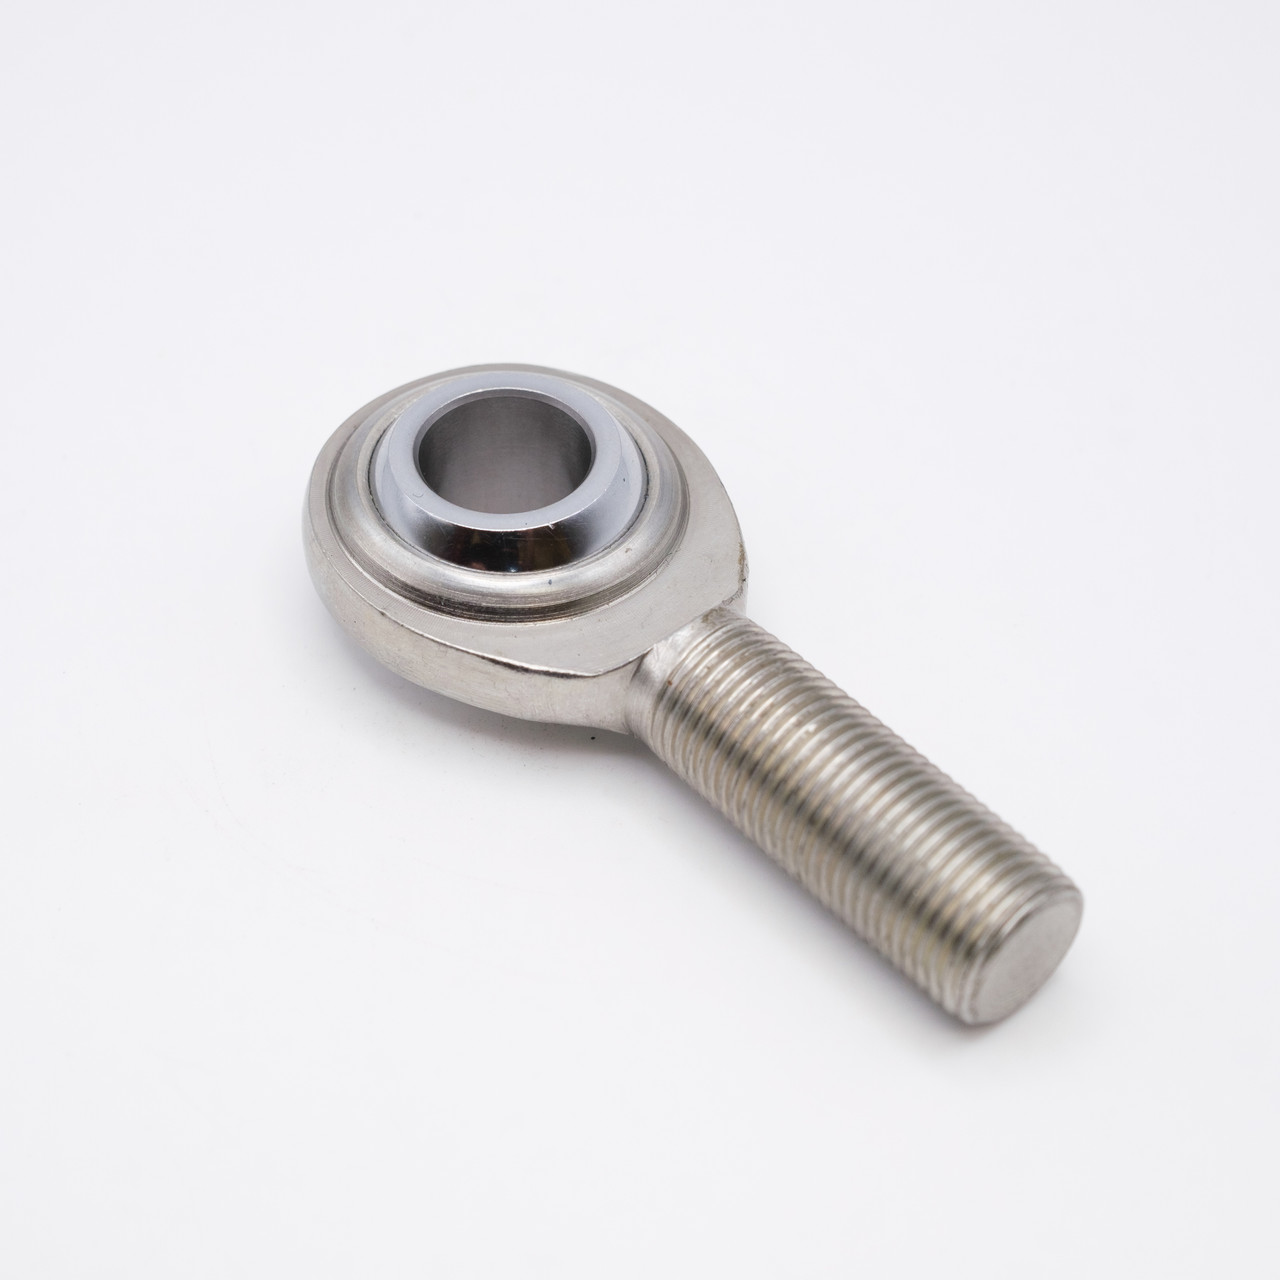 VCM-8 Male Rod-End Bearing Right Hand 1/2" Bore Left Angled View